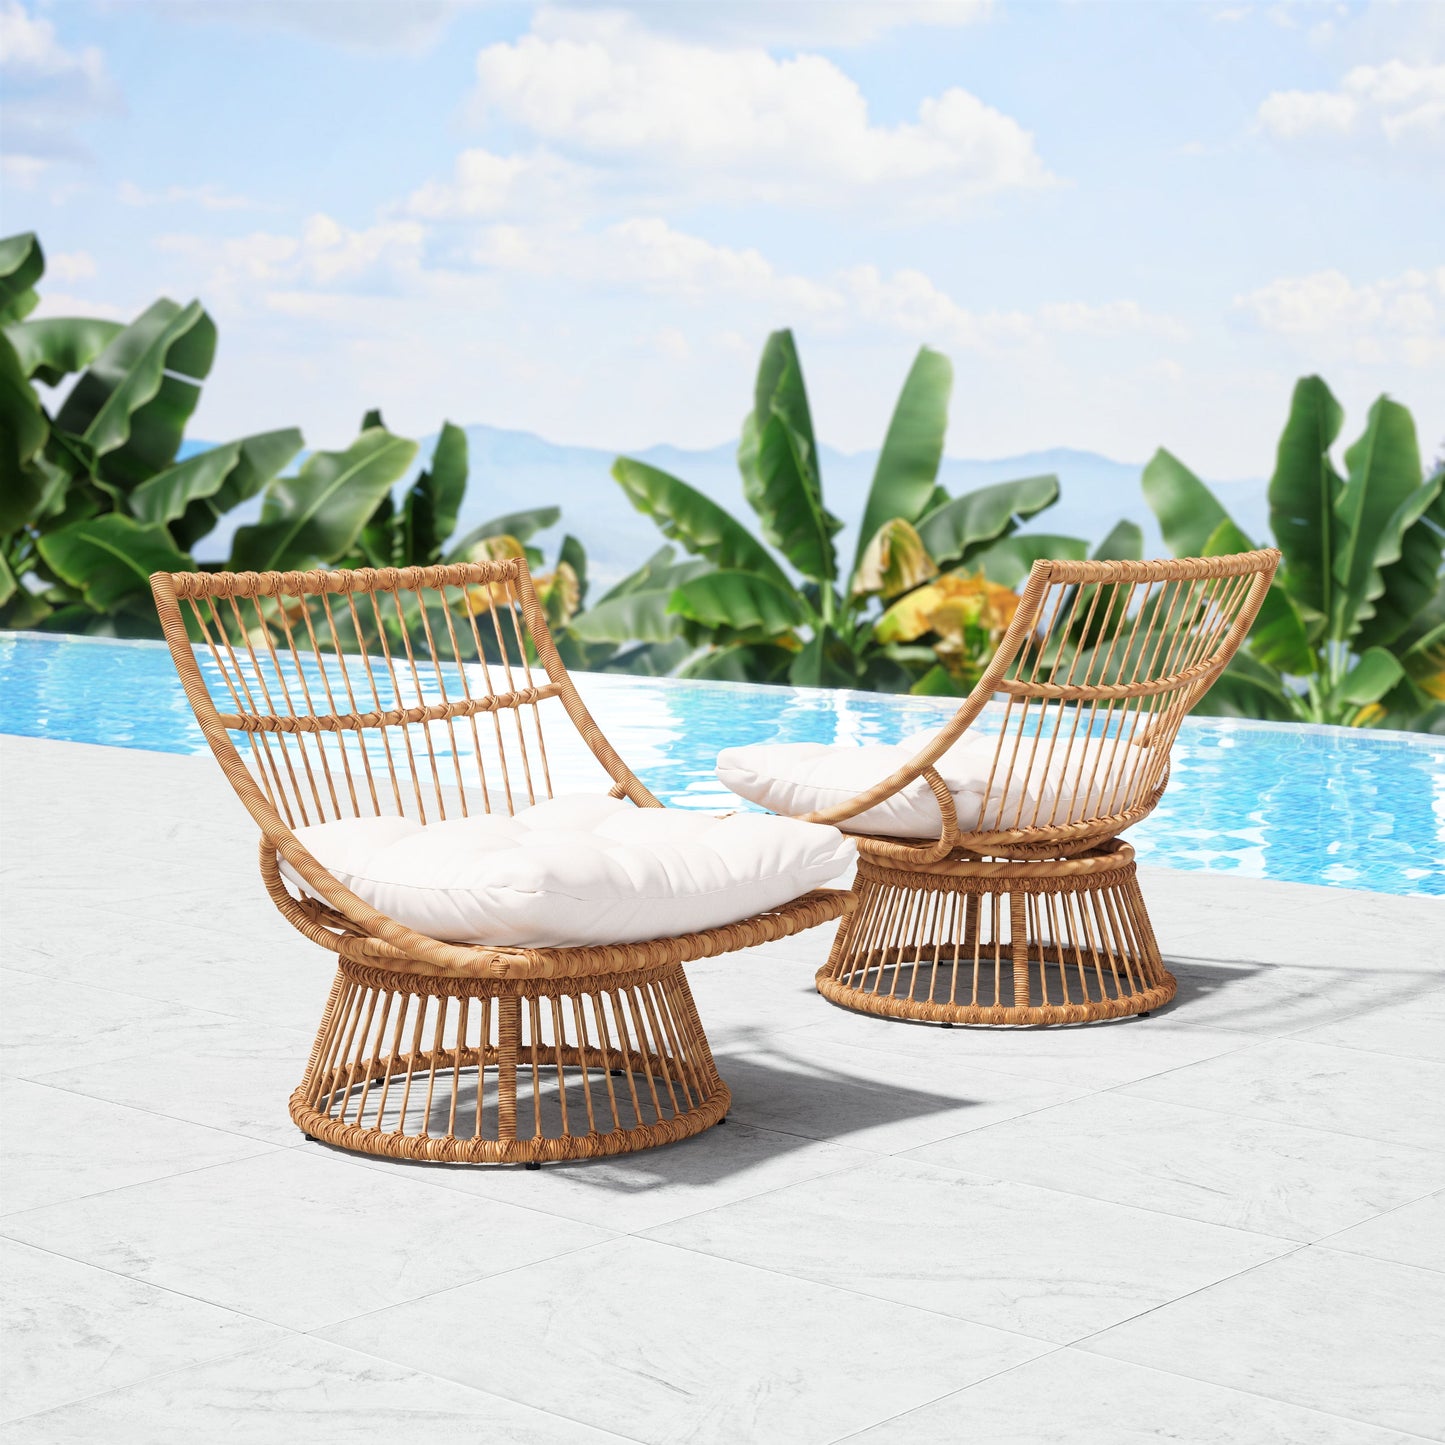 Franco Outdoor Accent chair is perfect poolside